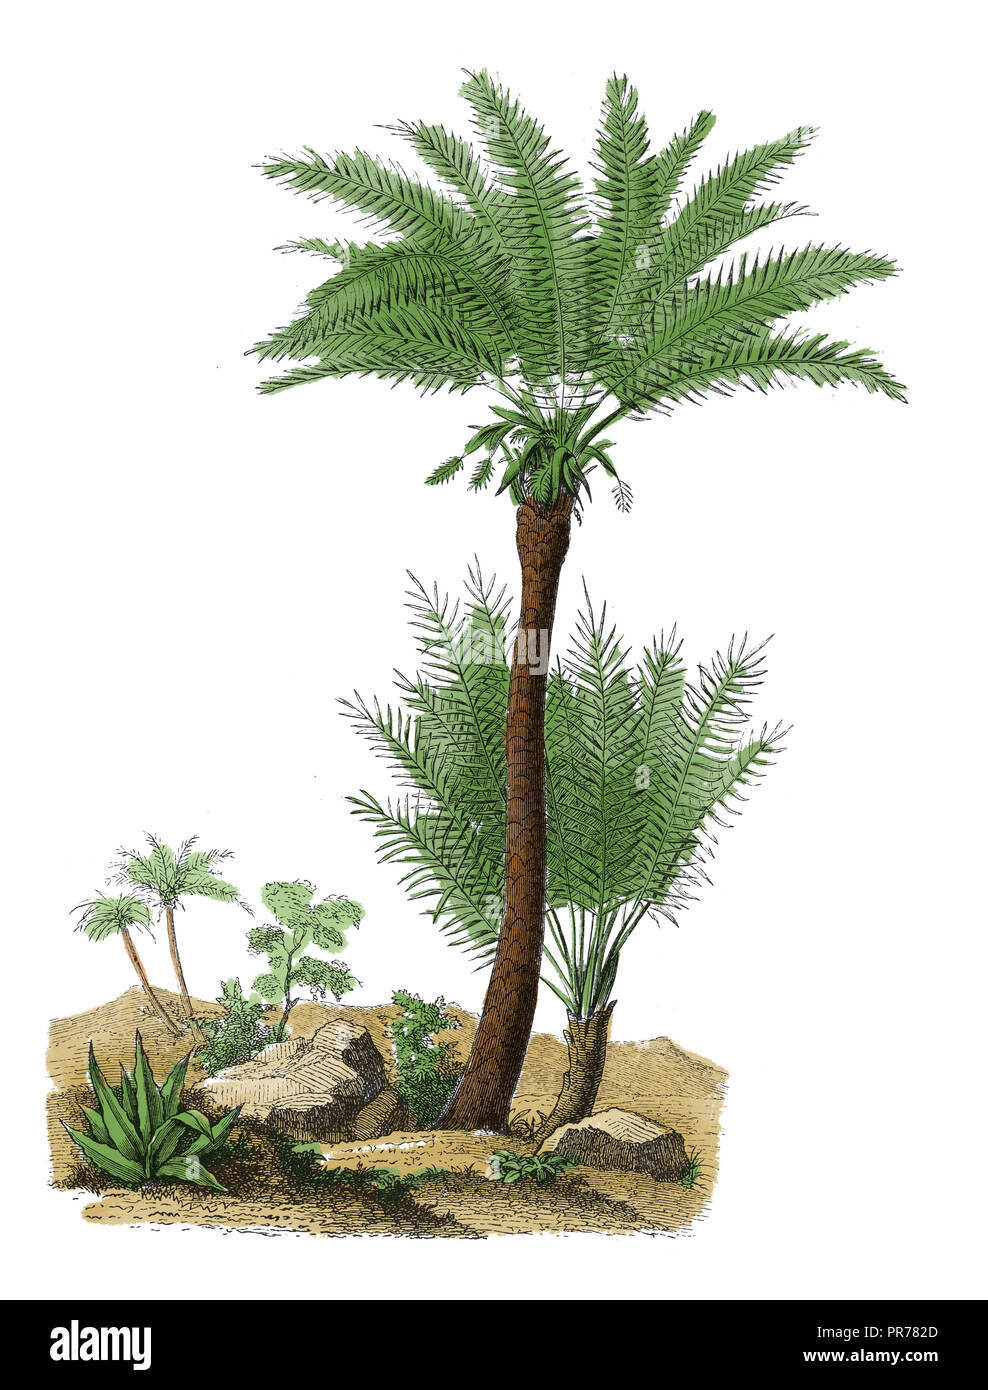 19th century illustration of phoenix dactylifera - a palm in the genus Phoenix, cultivated for its edible sweet fruit. Published in Systematischer Bil Stock Photo